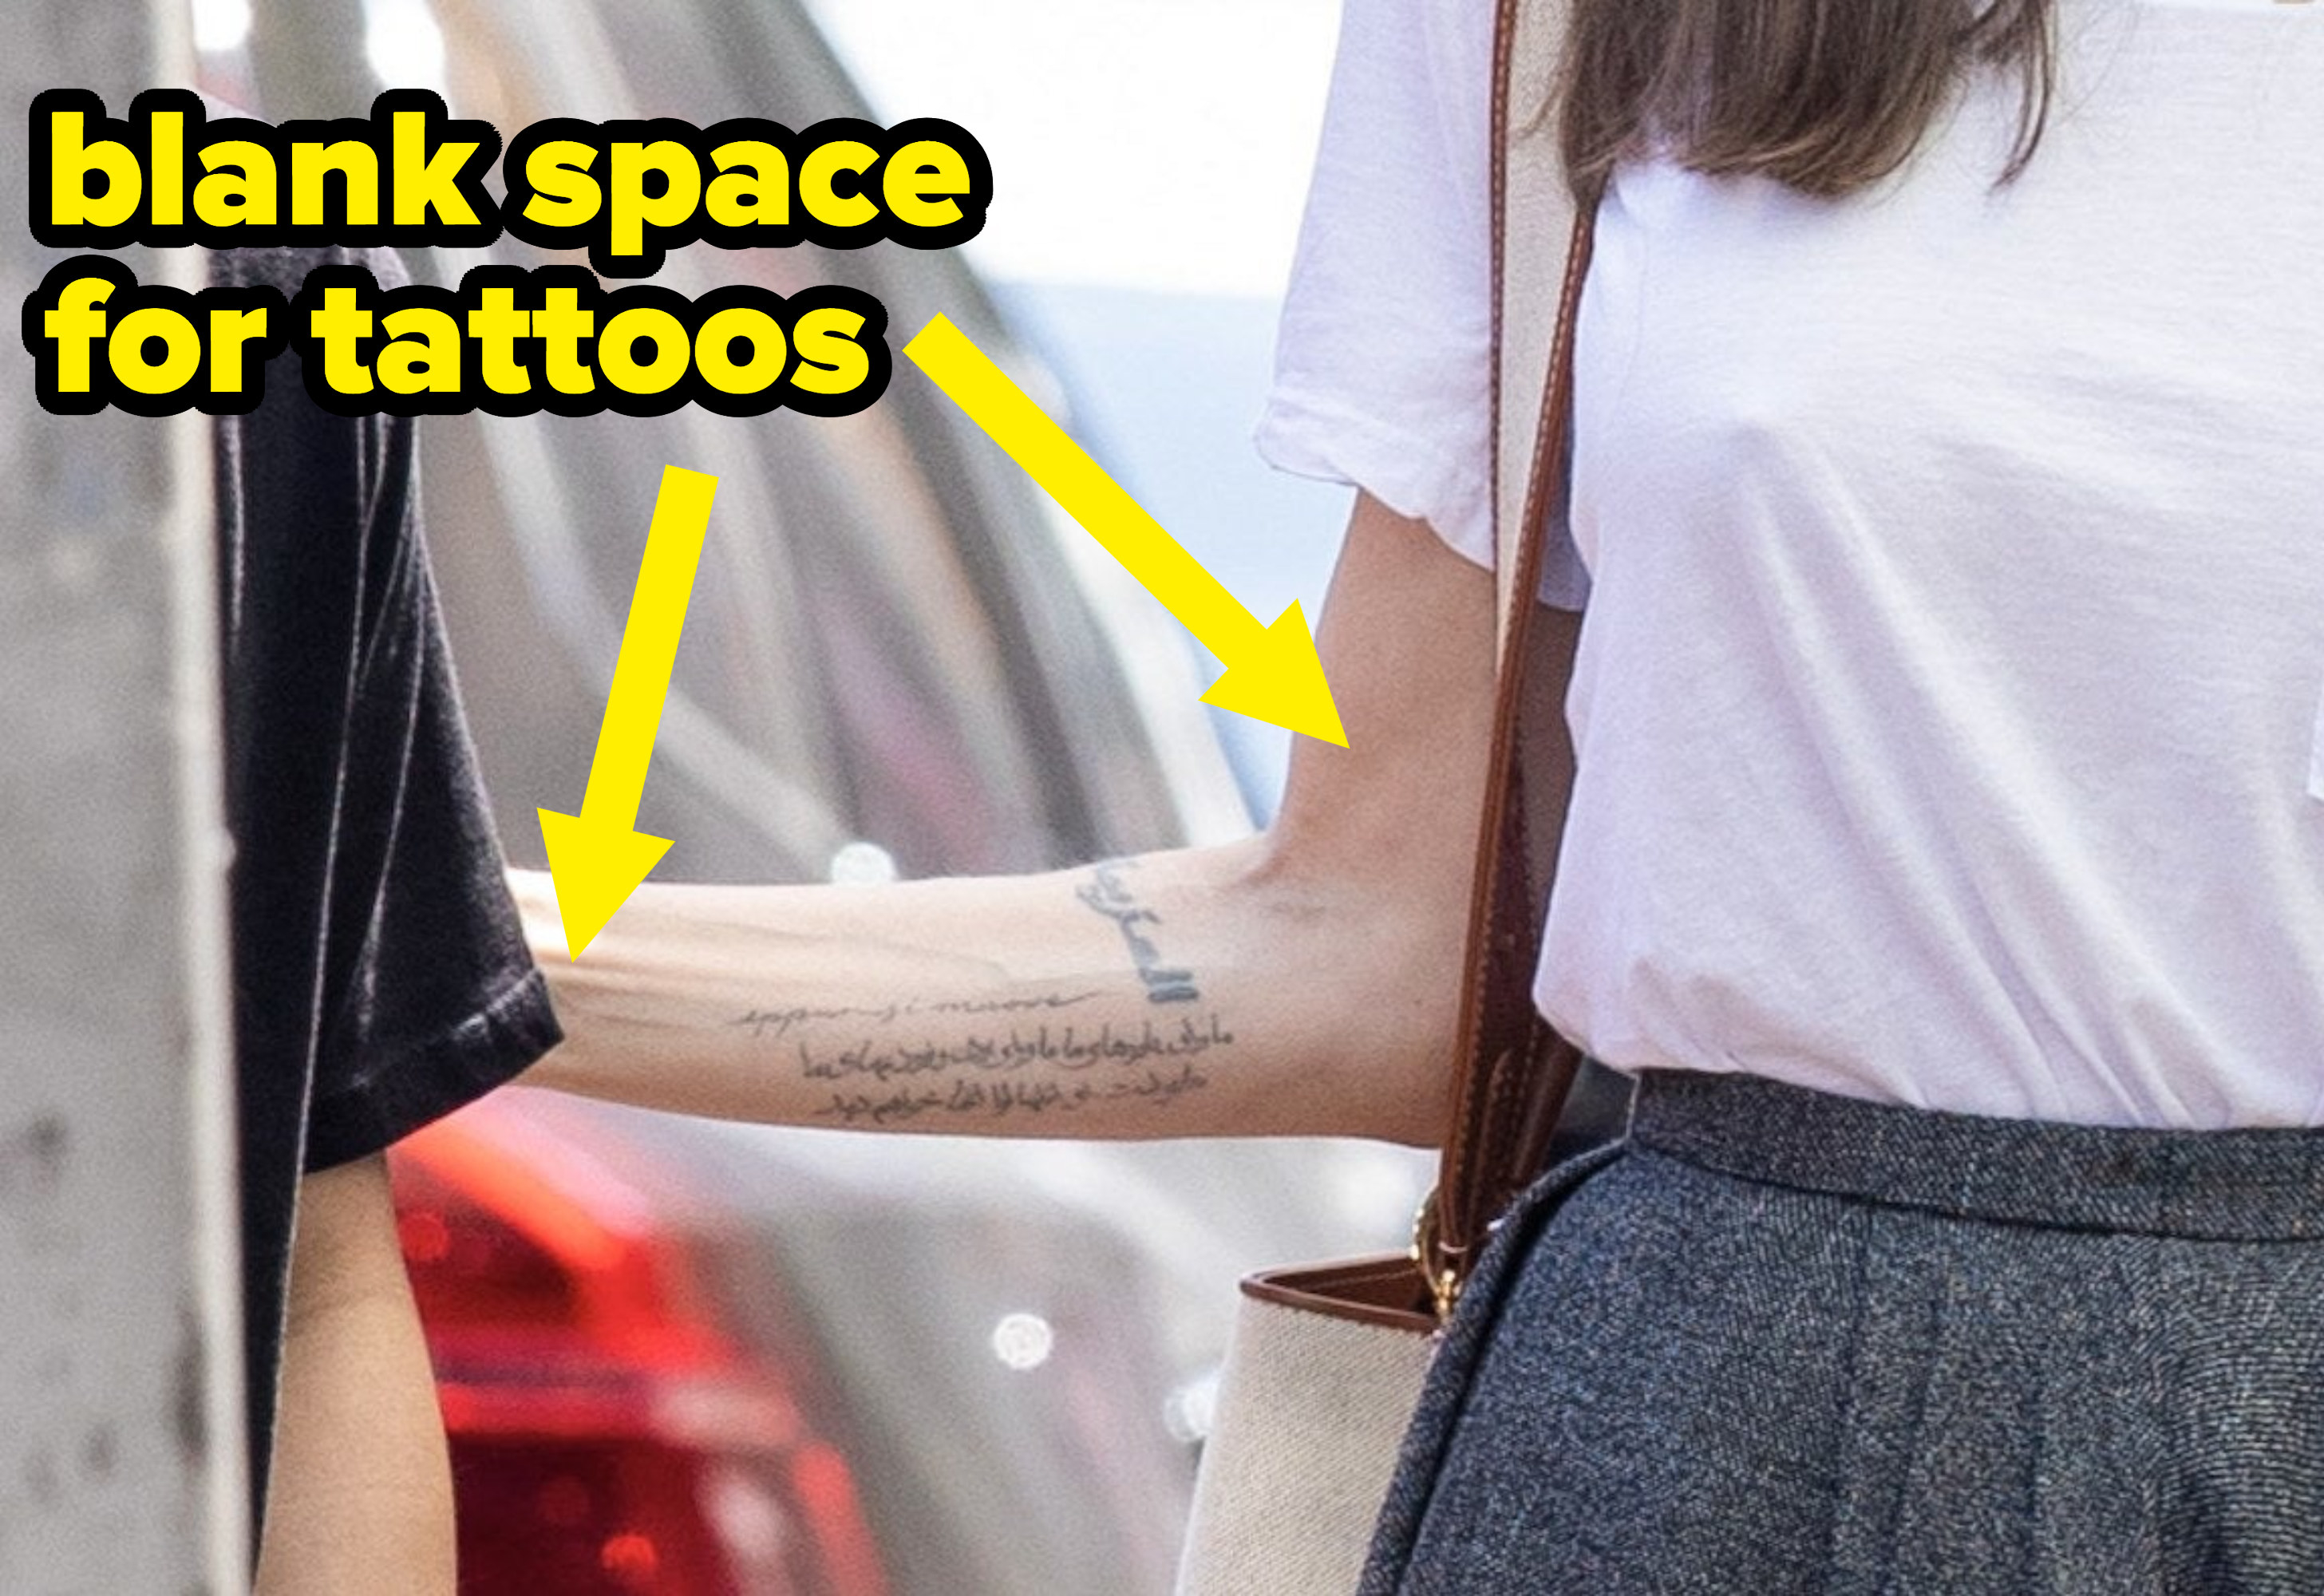 An arrow points out all the other space Angelina has for tattoos on her arms